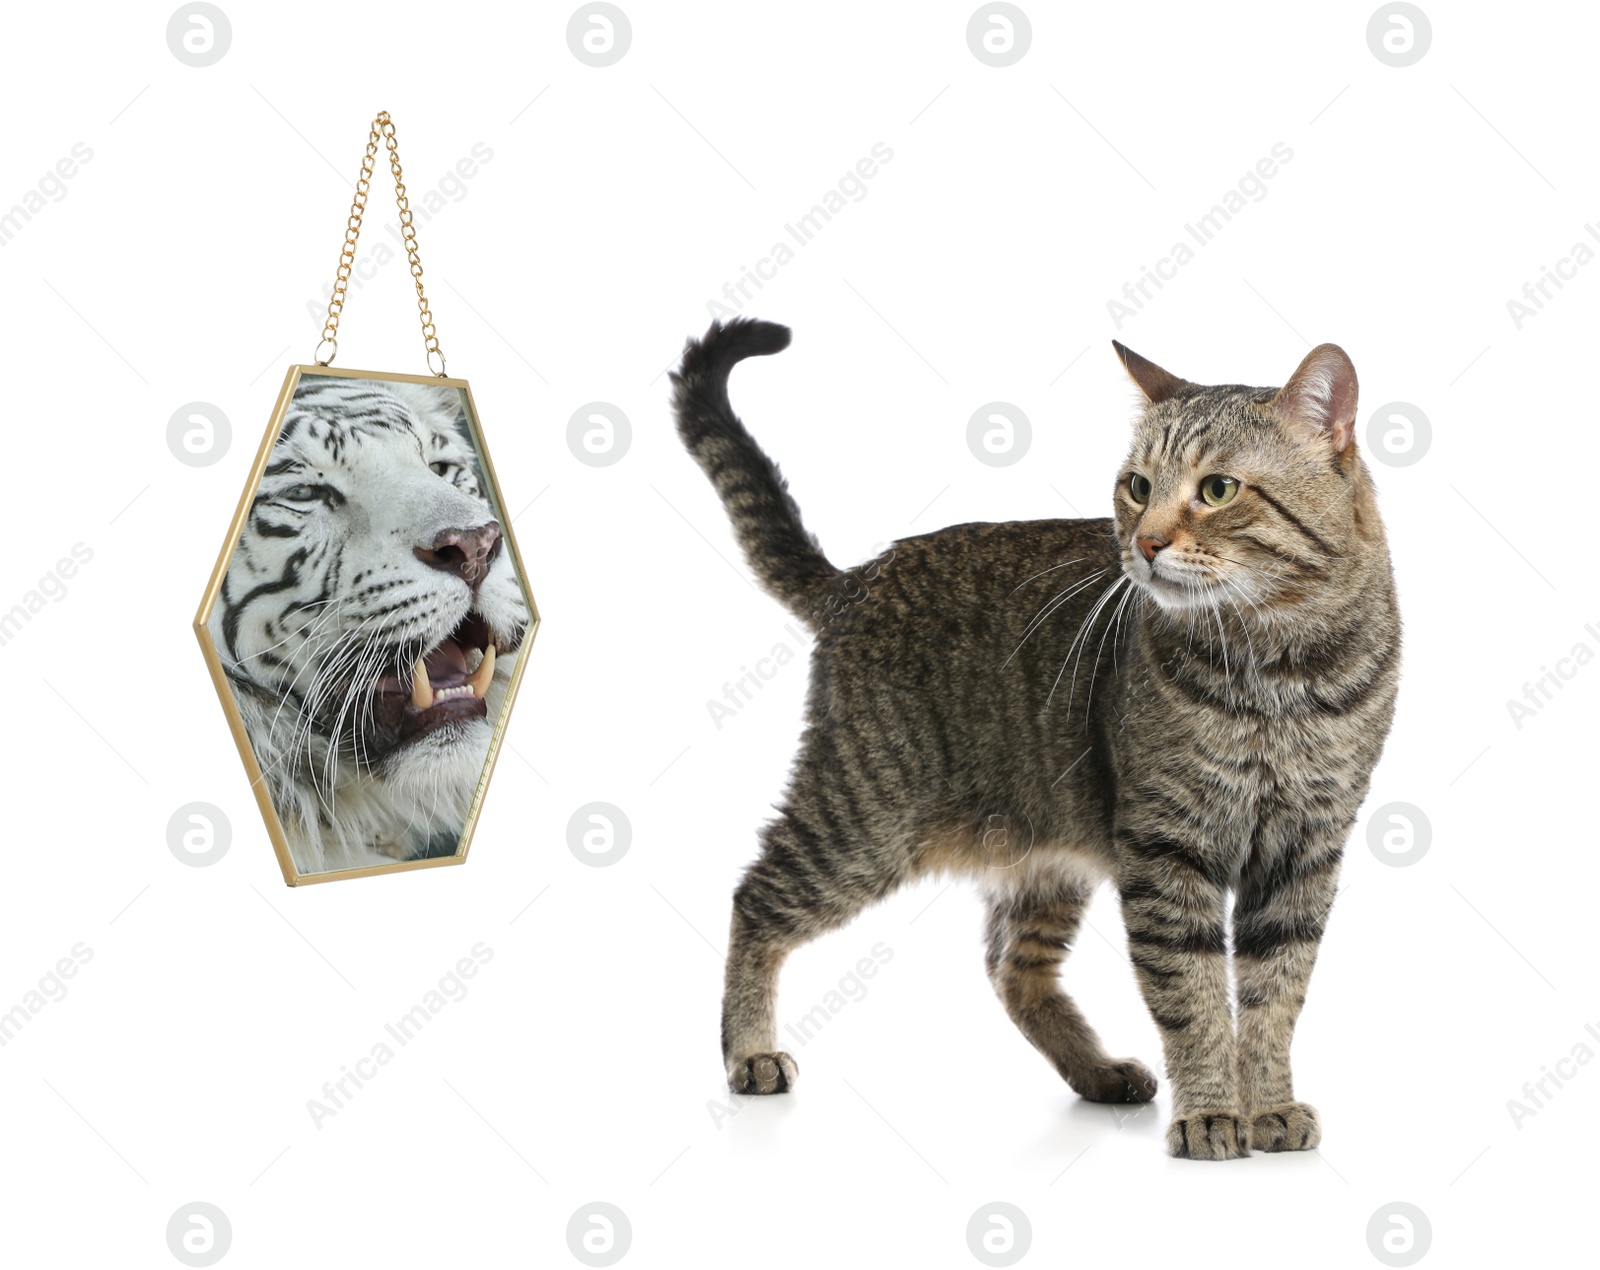 Image of Cat and mirror with reflection of bengal tiger on white background